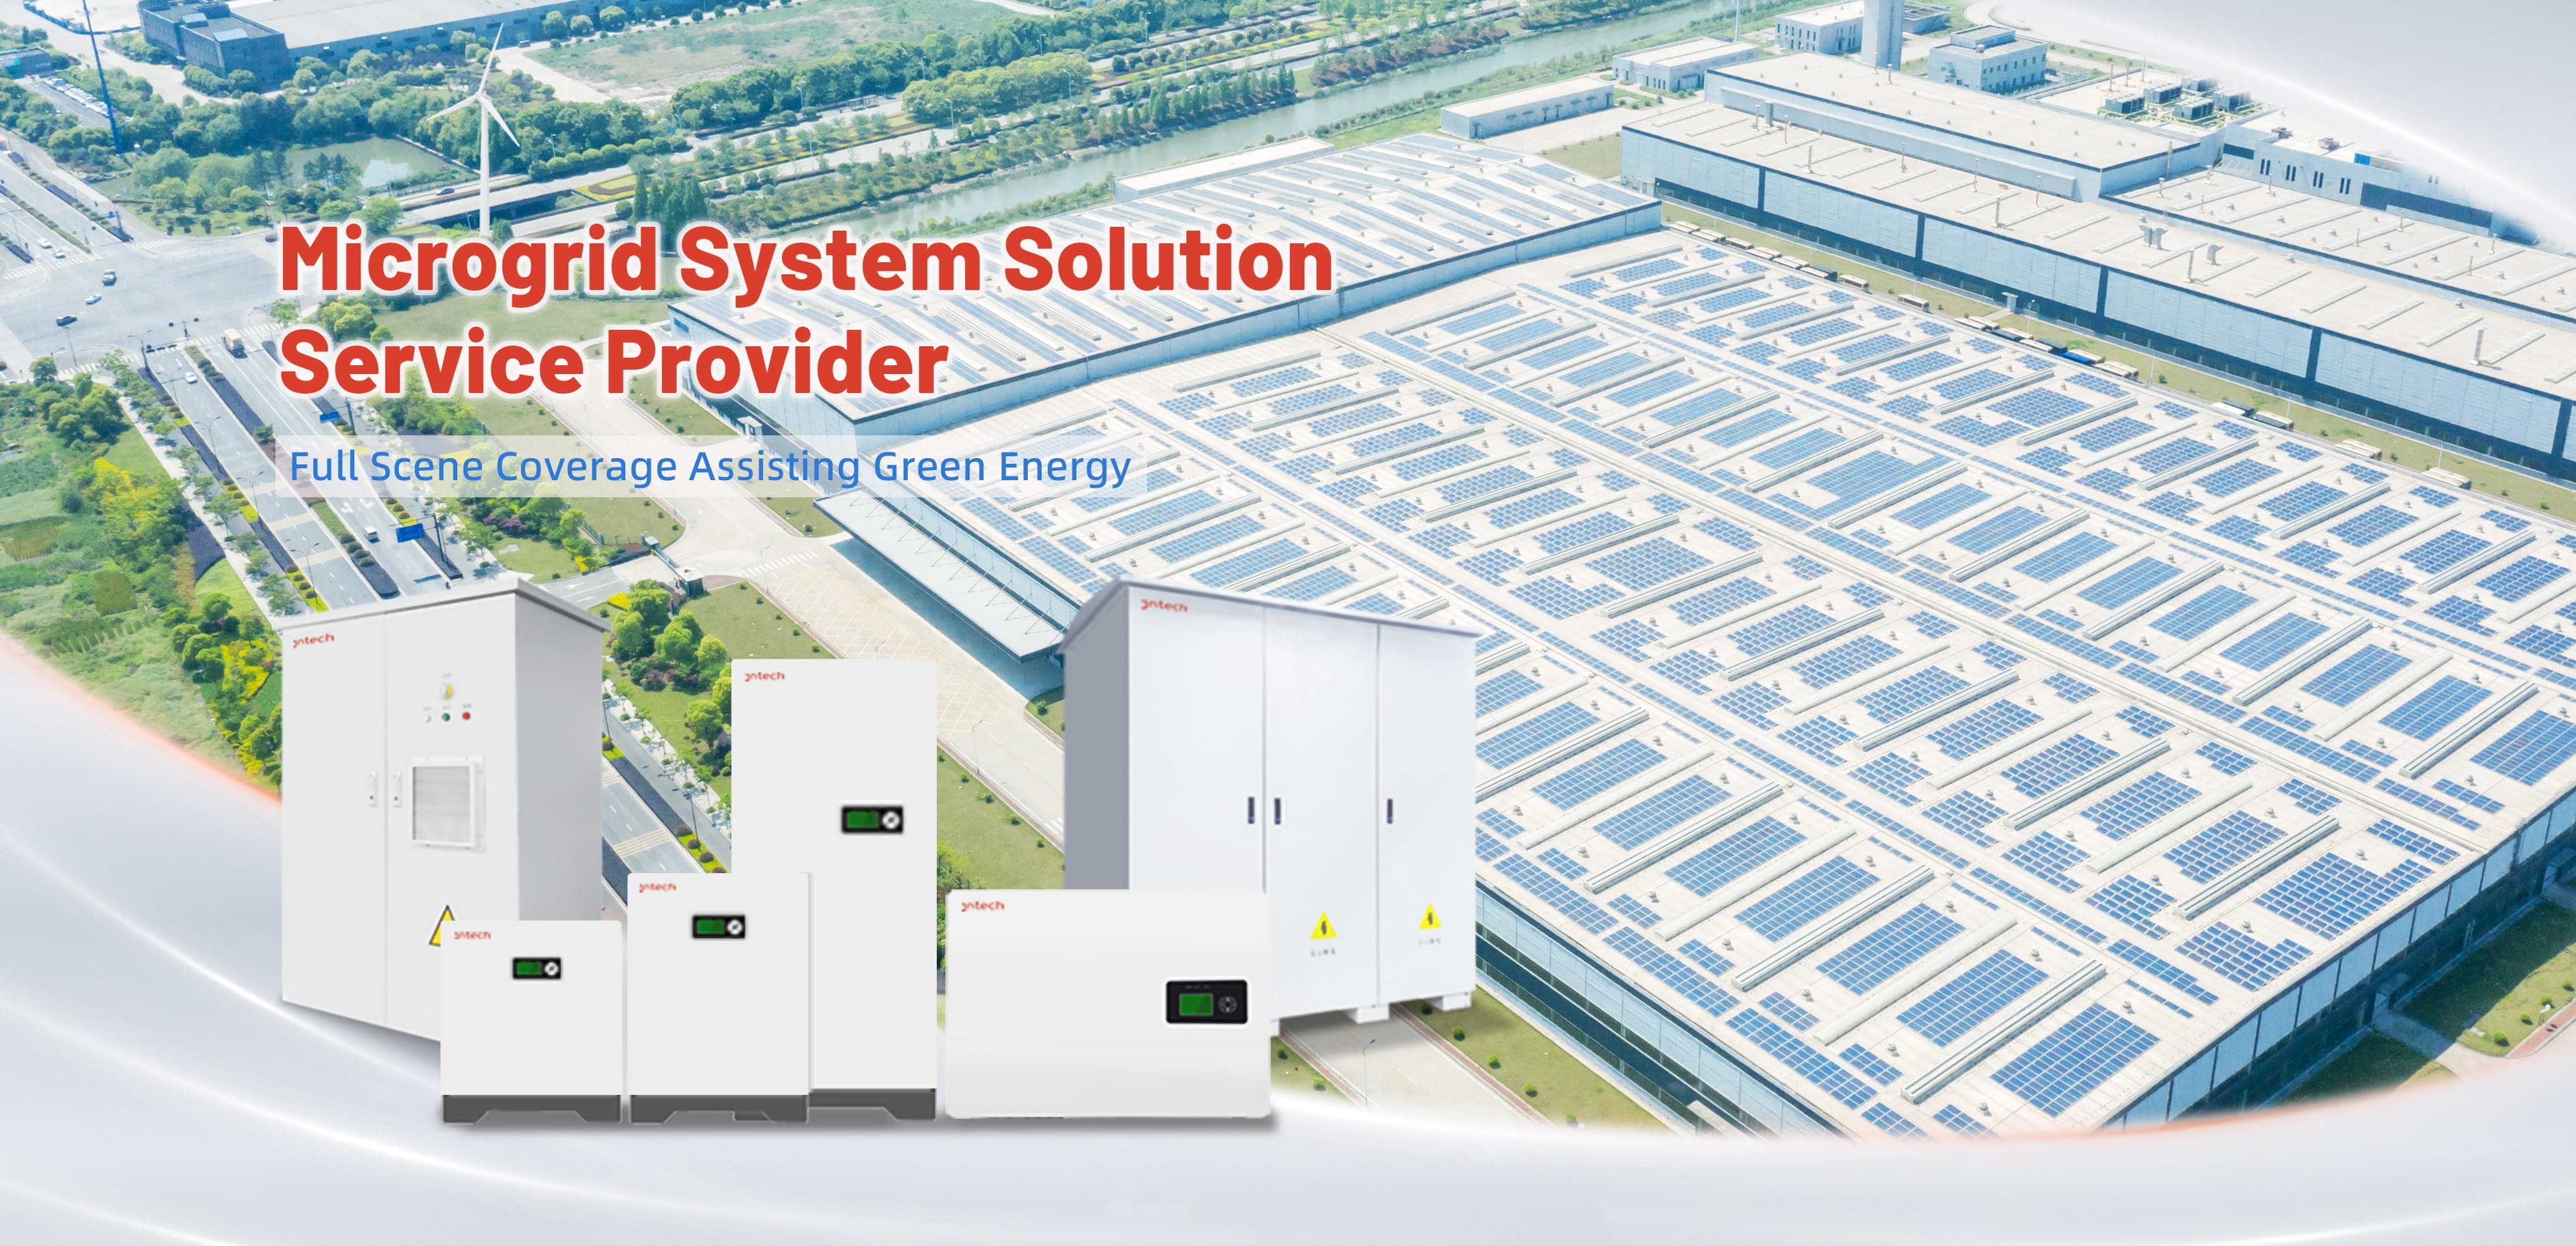 Microgrid system solution service provider